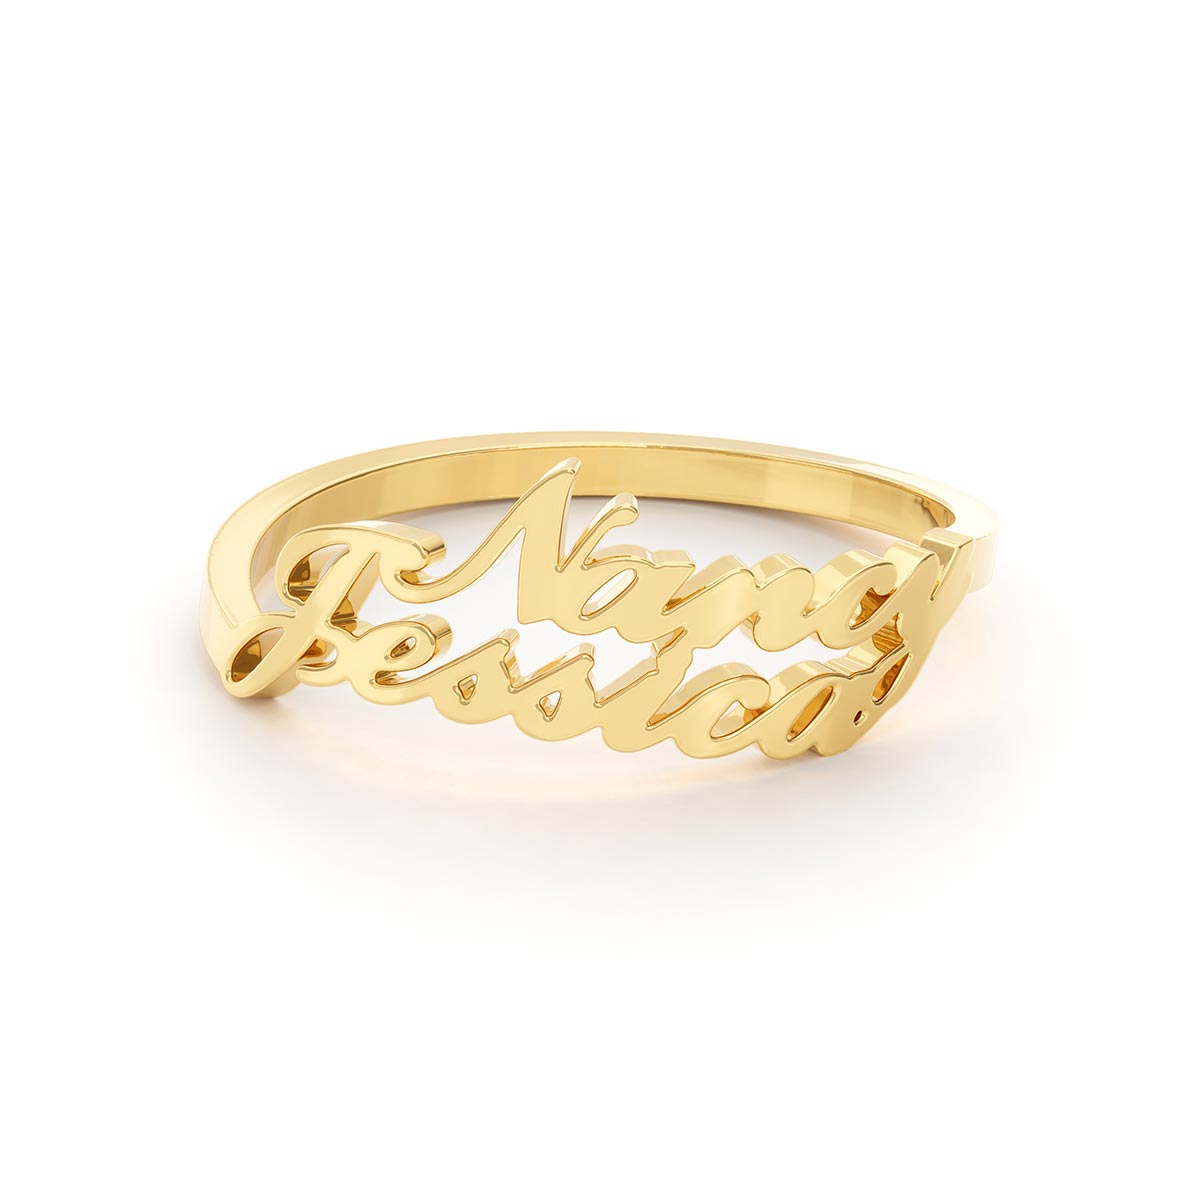 Personalized 2 Name Ring